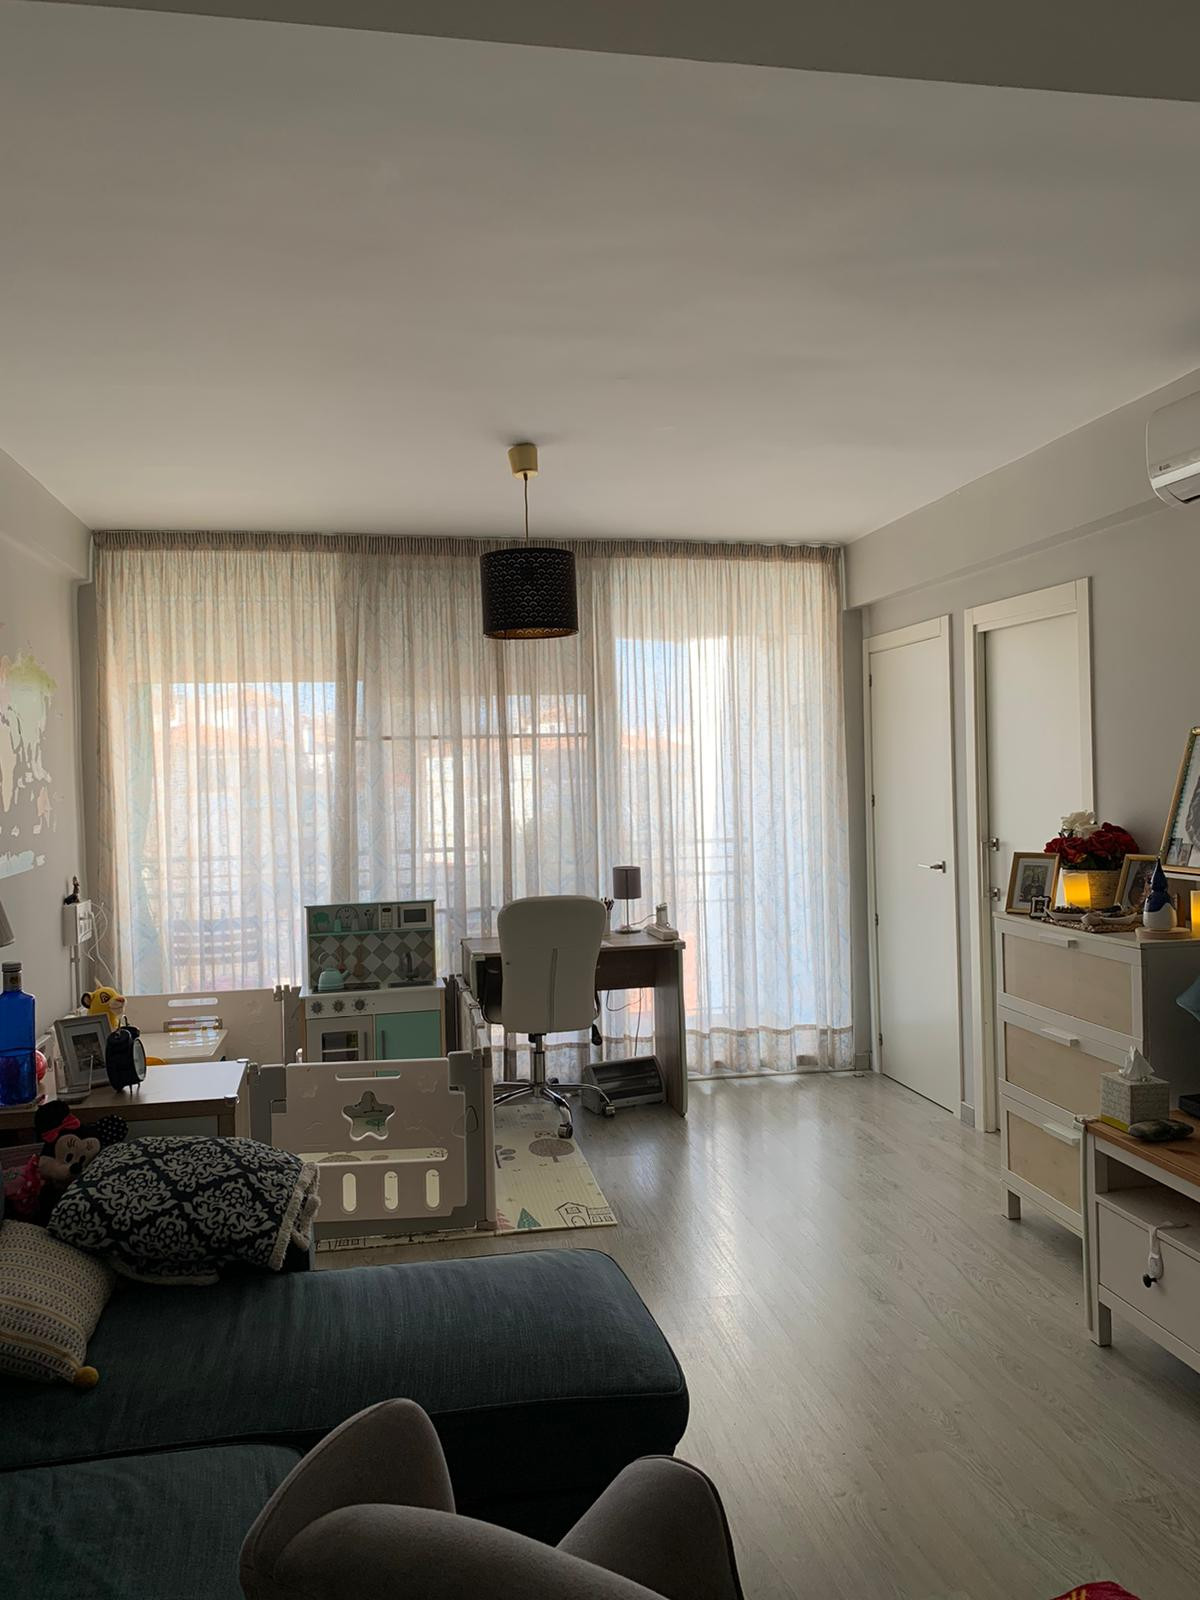 A superb apartment located in the heart of Torre del Mar, just 3 to 4 minutes walk from the beach and in walking distance to other local amenities:...